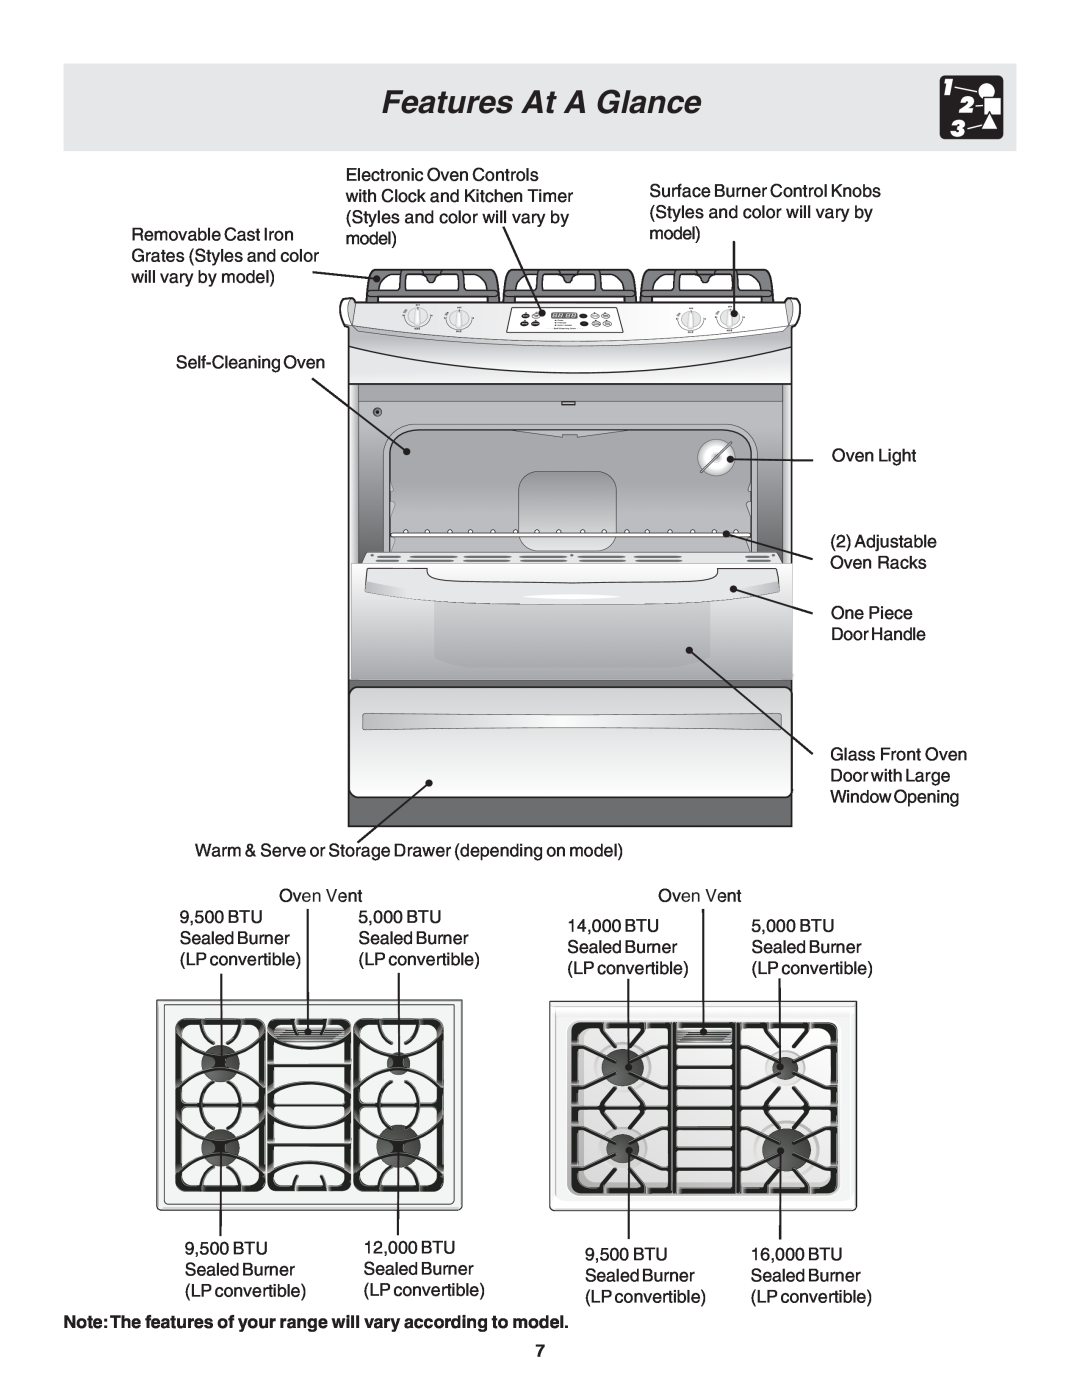 Frigidaire 318203873 manual Features At A Glance, NoteThe features of your range will vary according to model 